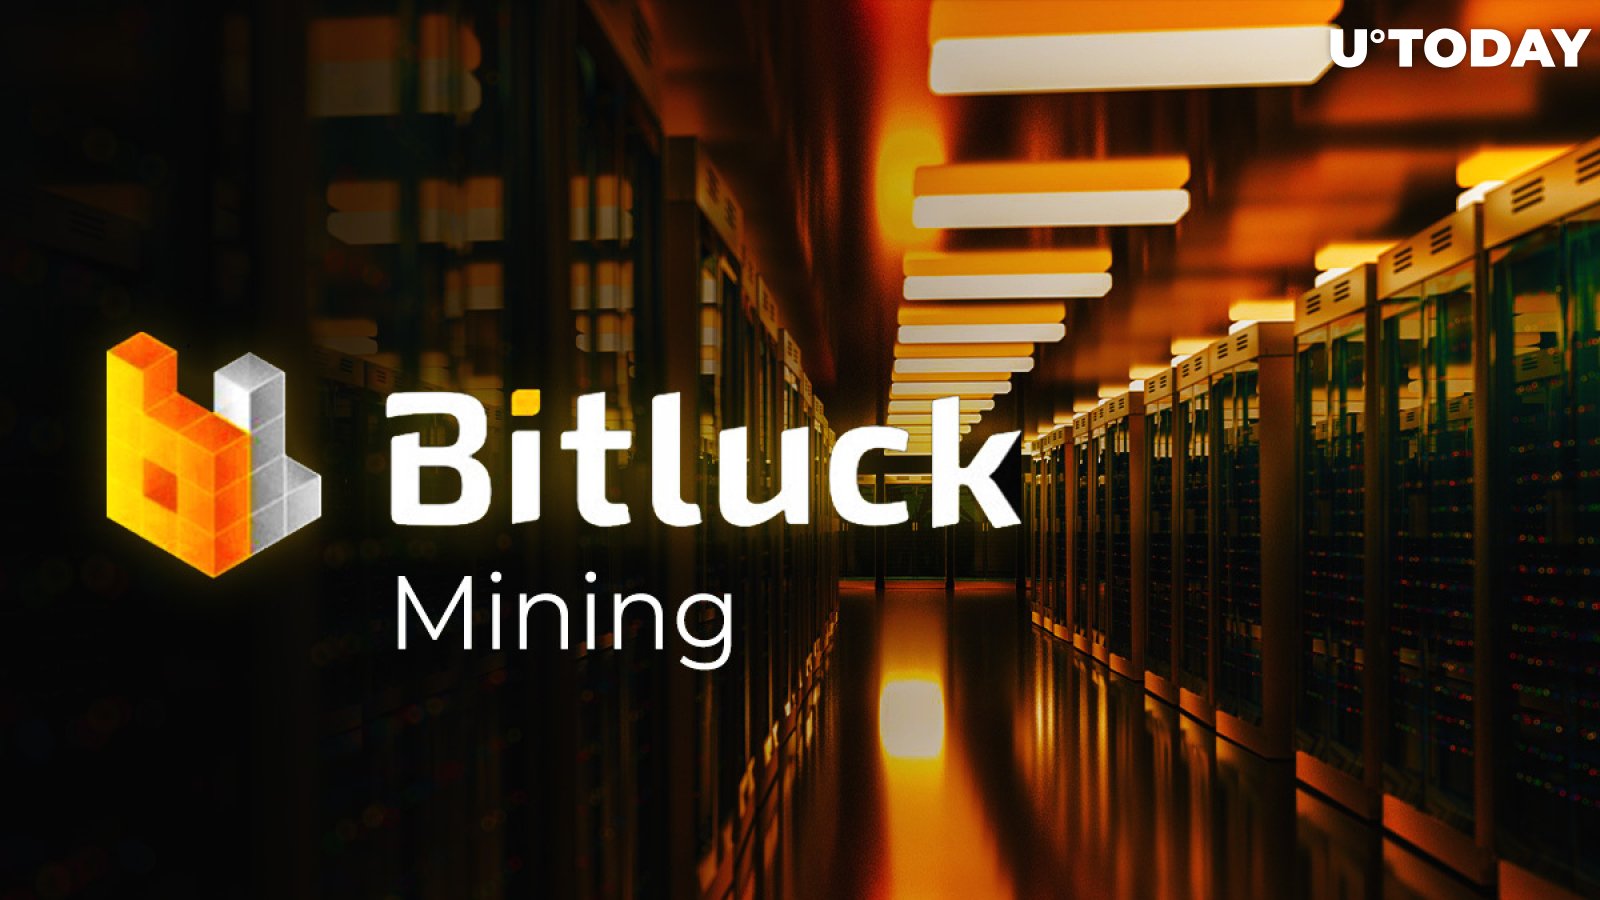 Bitluck Mining Company Updates Bitcoin (BTC) Mining Gear, New Contracts Released